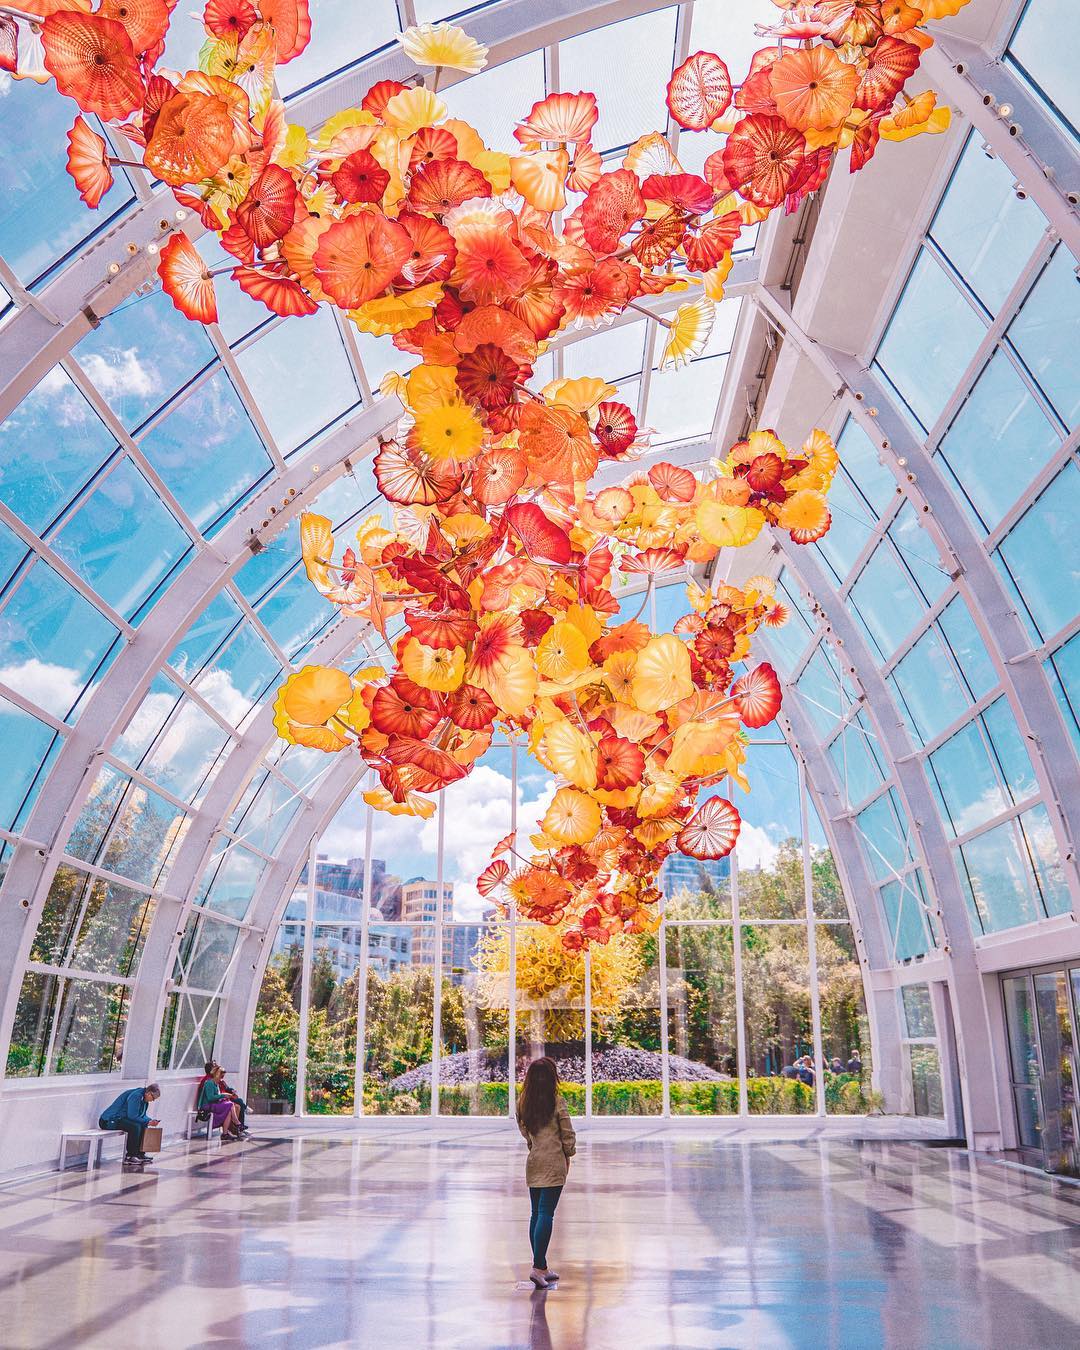 Red and yellow glass flowers at the Chihuly Garden in Seattle. Photo by Instagram user @nastasiaspassport